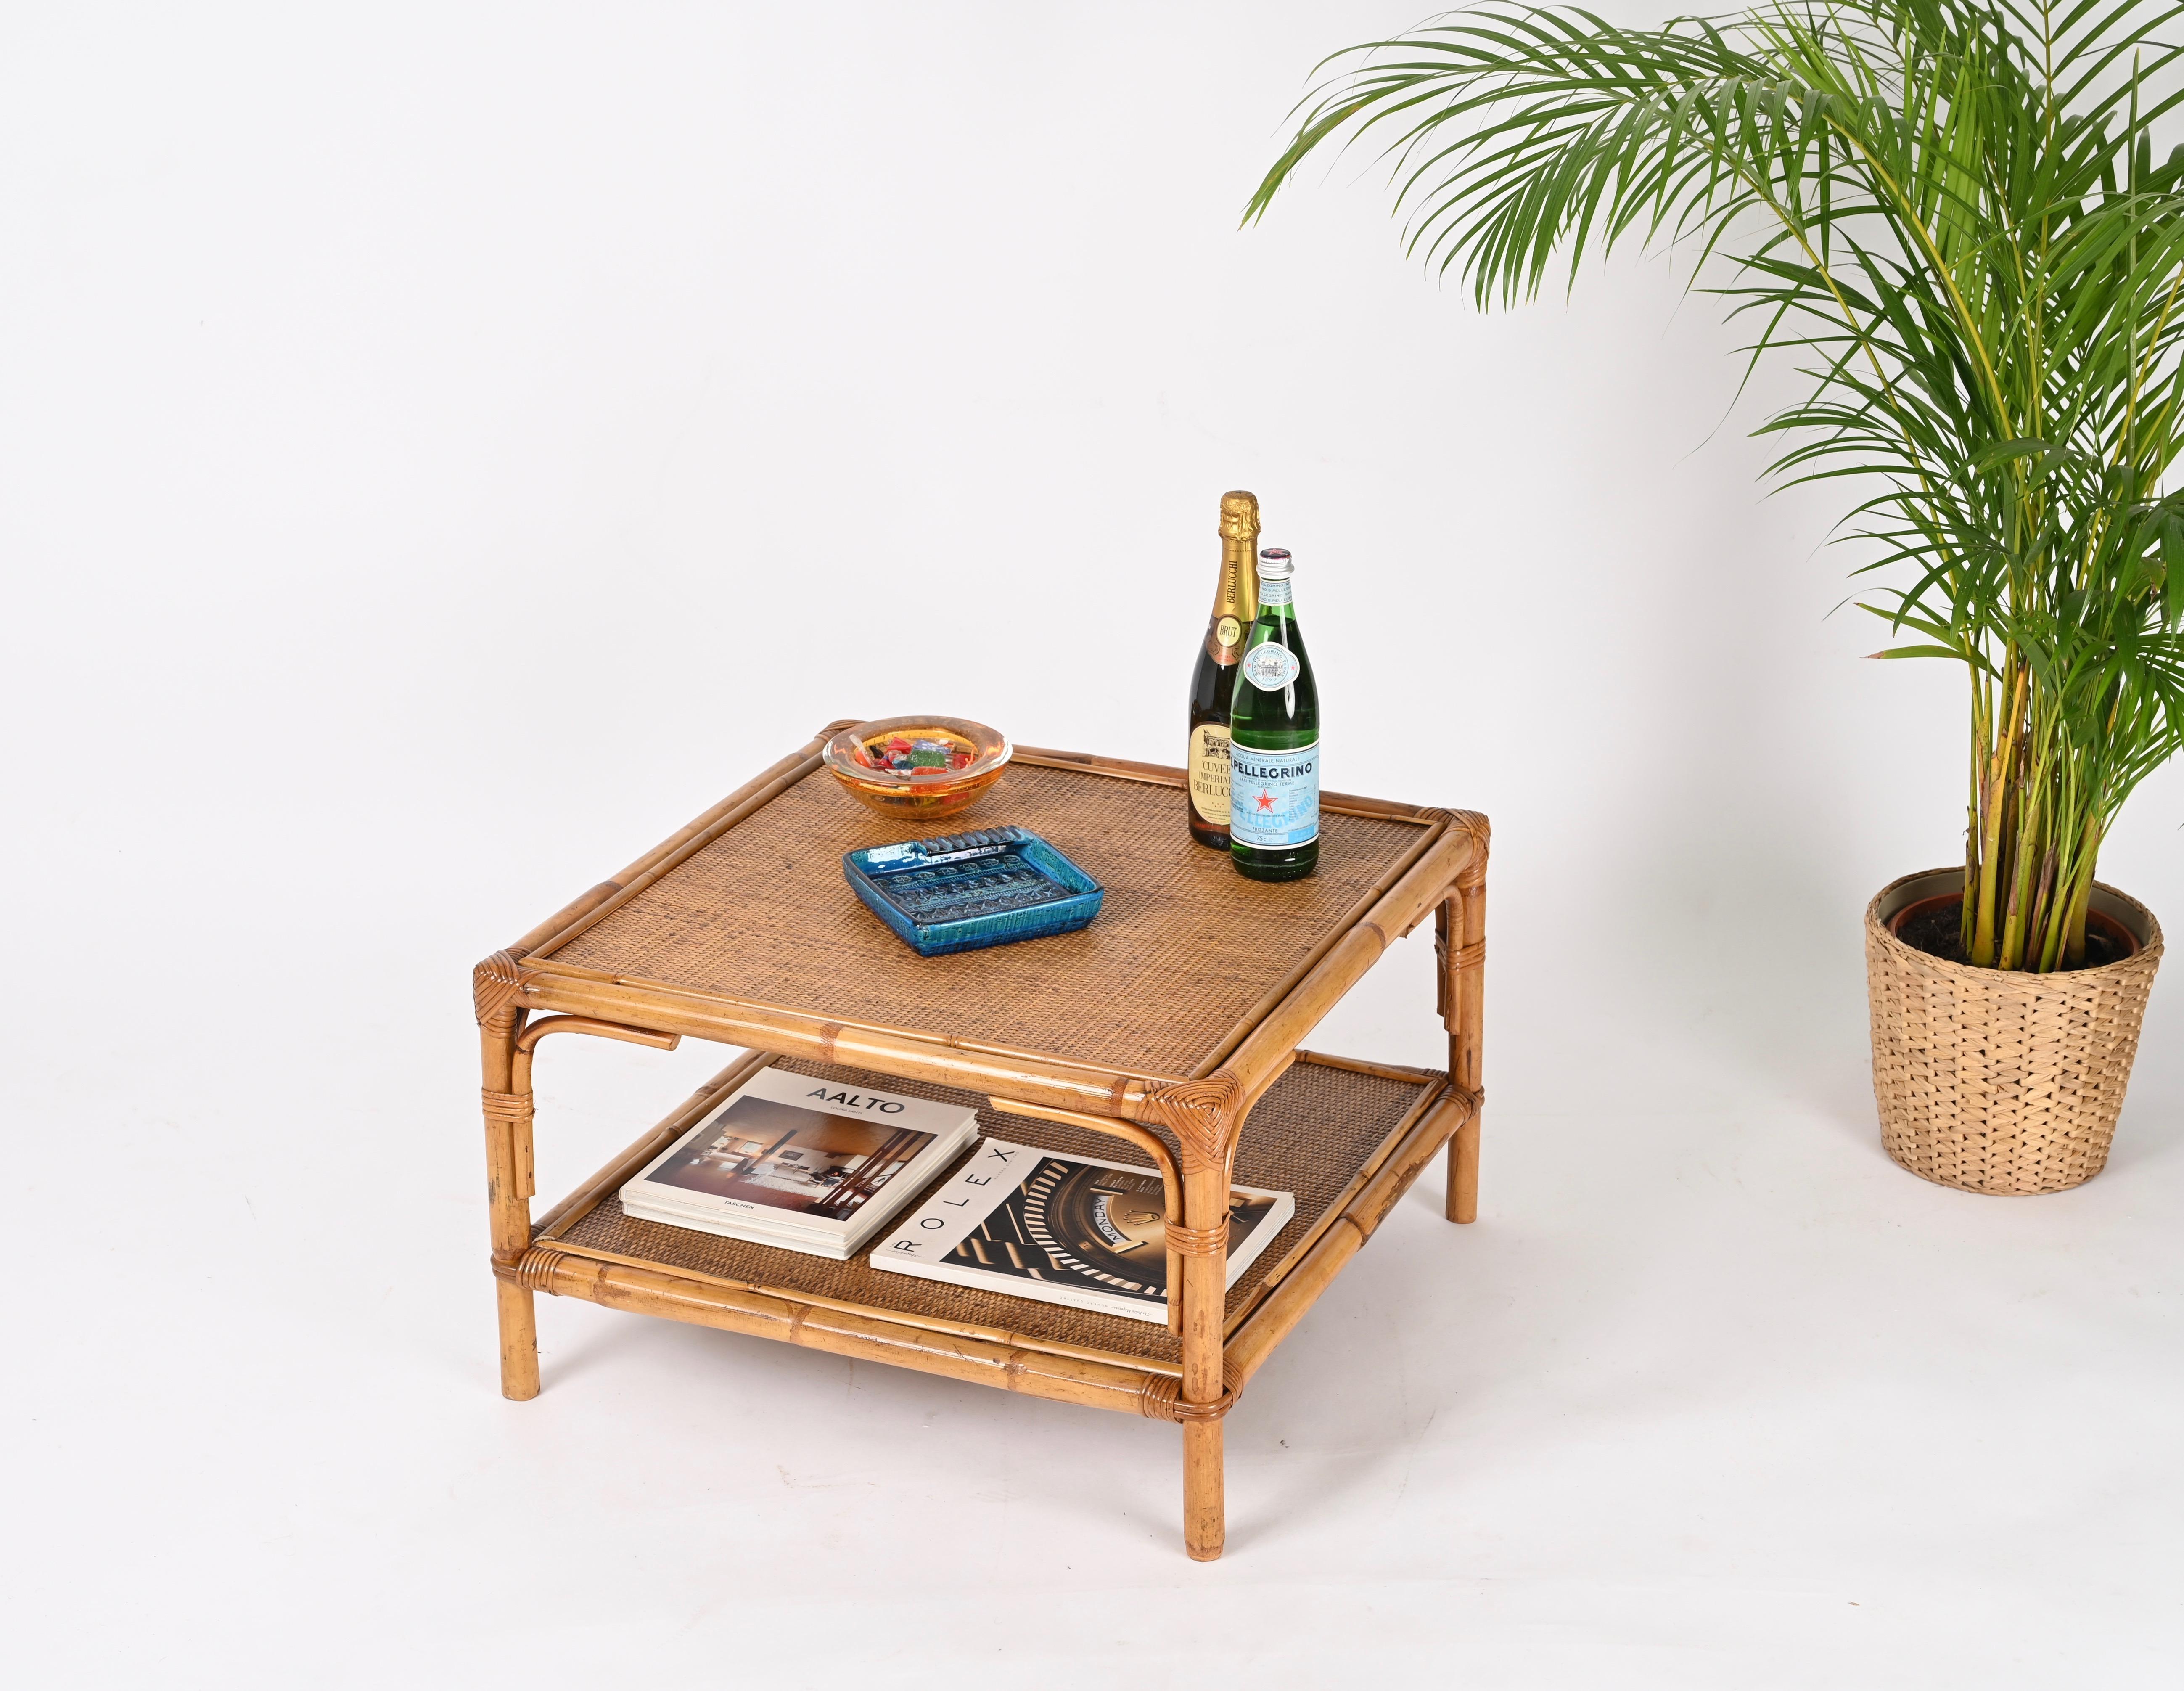 Vivai del Sud Midcentury Italian Square Coffee Table in Bamboo and Rattan, 1970s For Sale 2